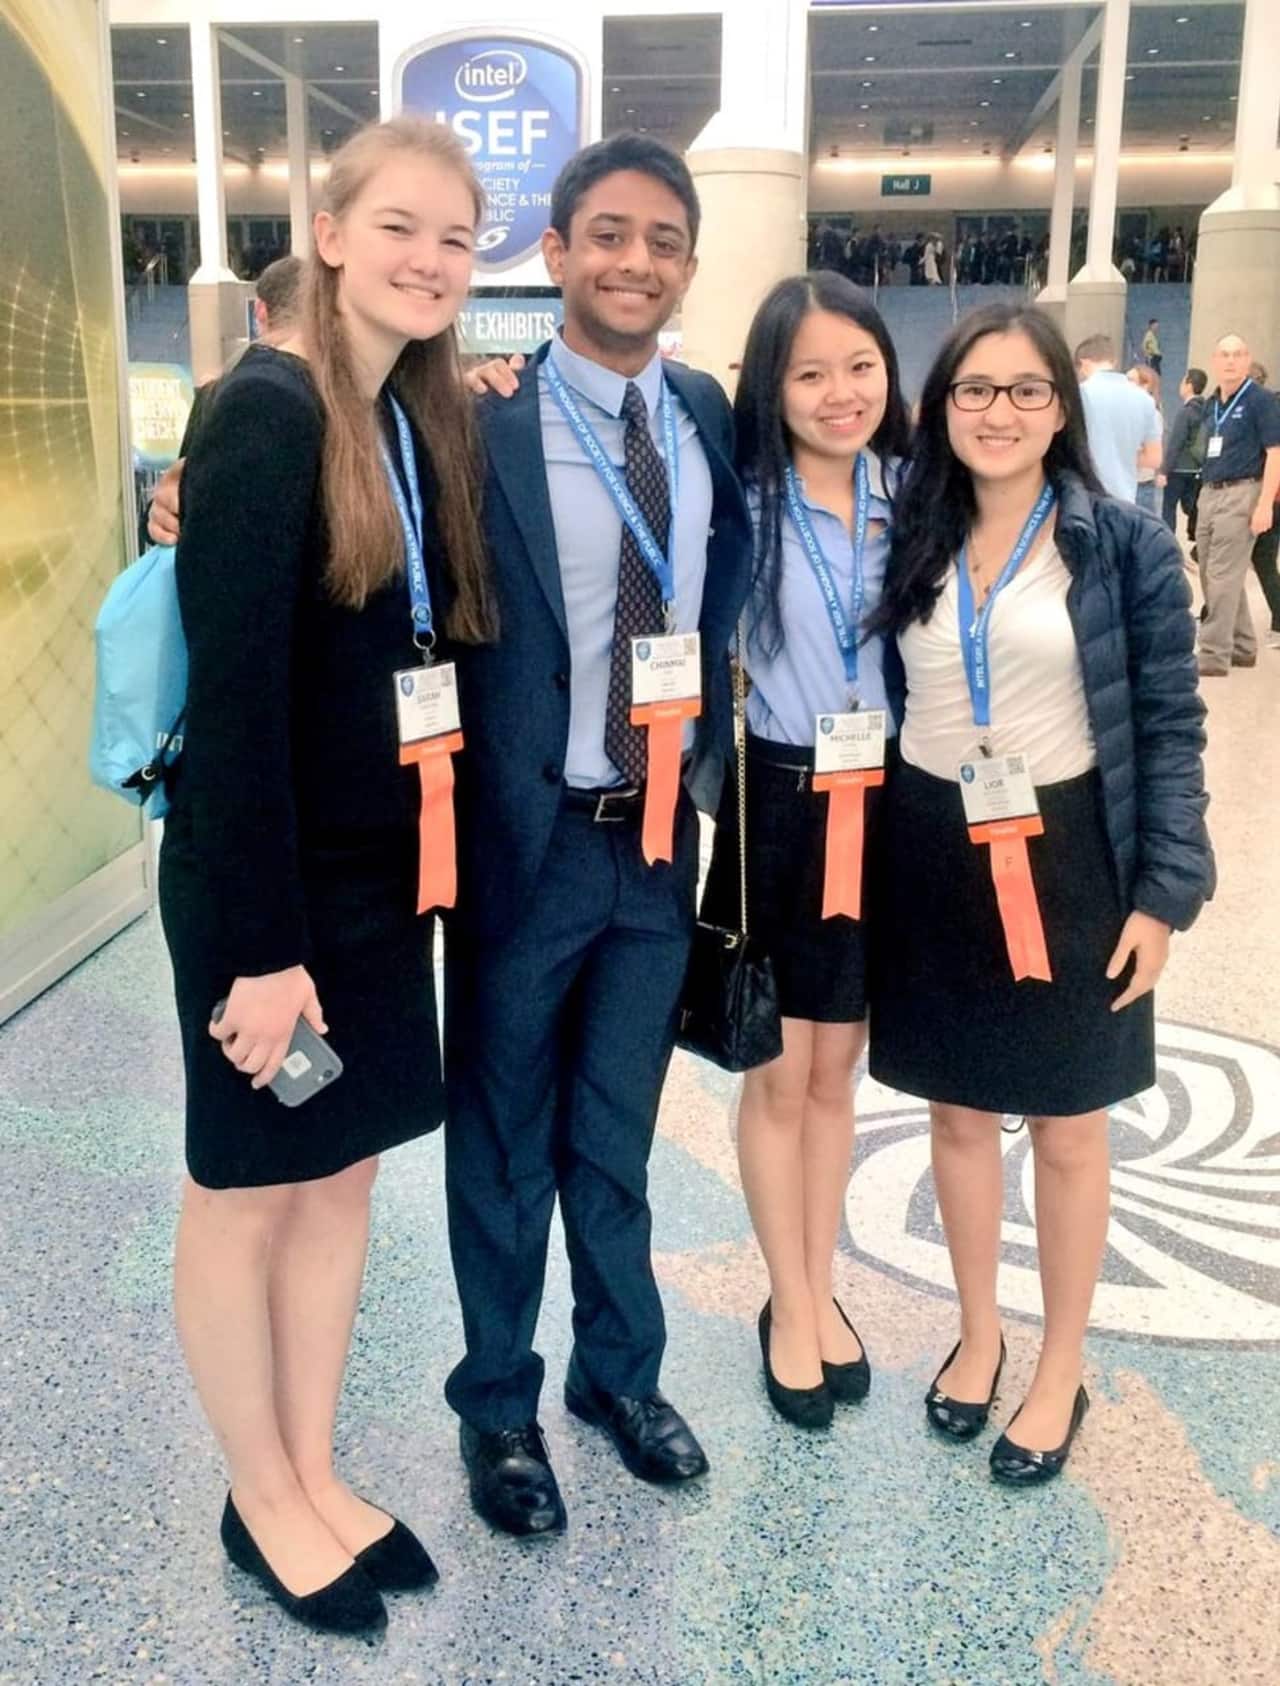 Four Ossining students won awards at an international science competition.